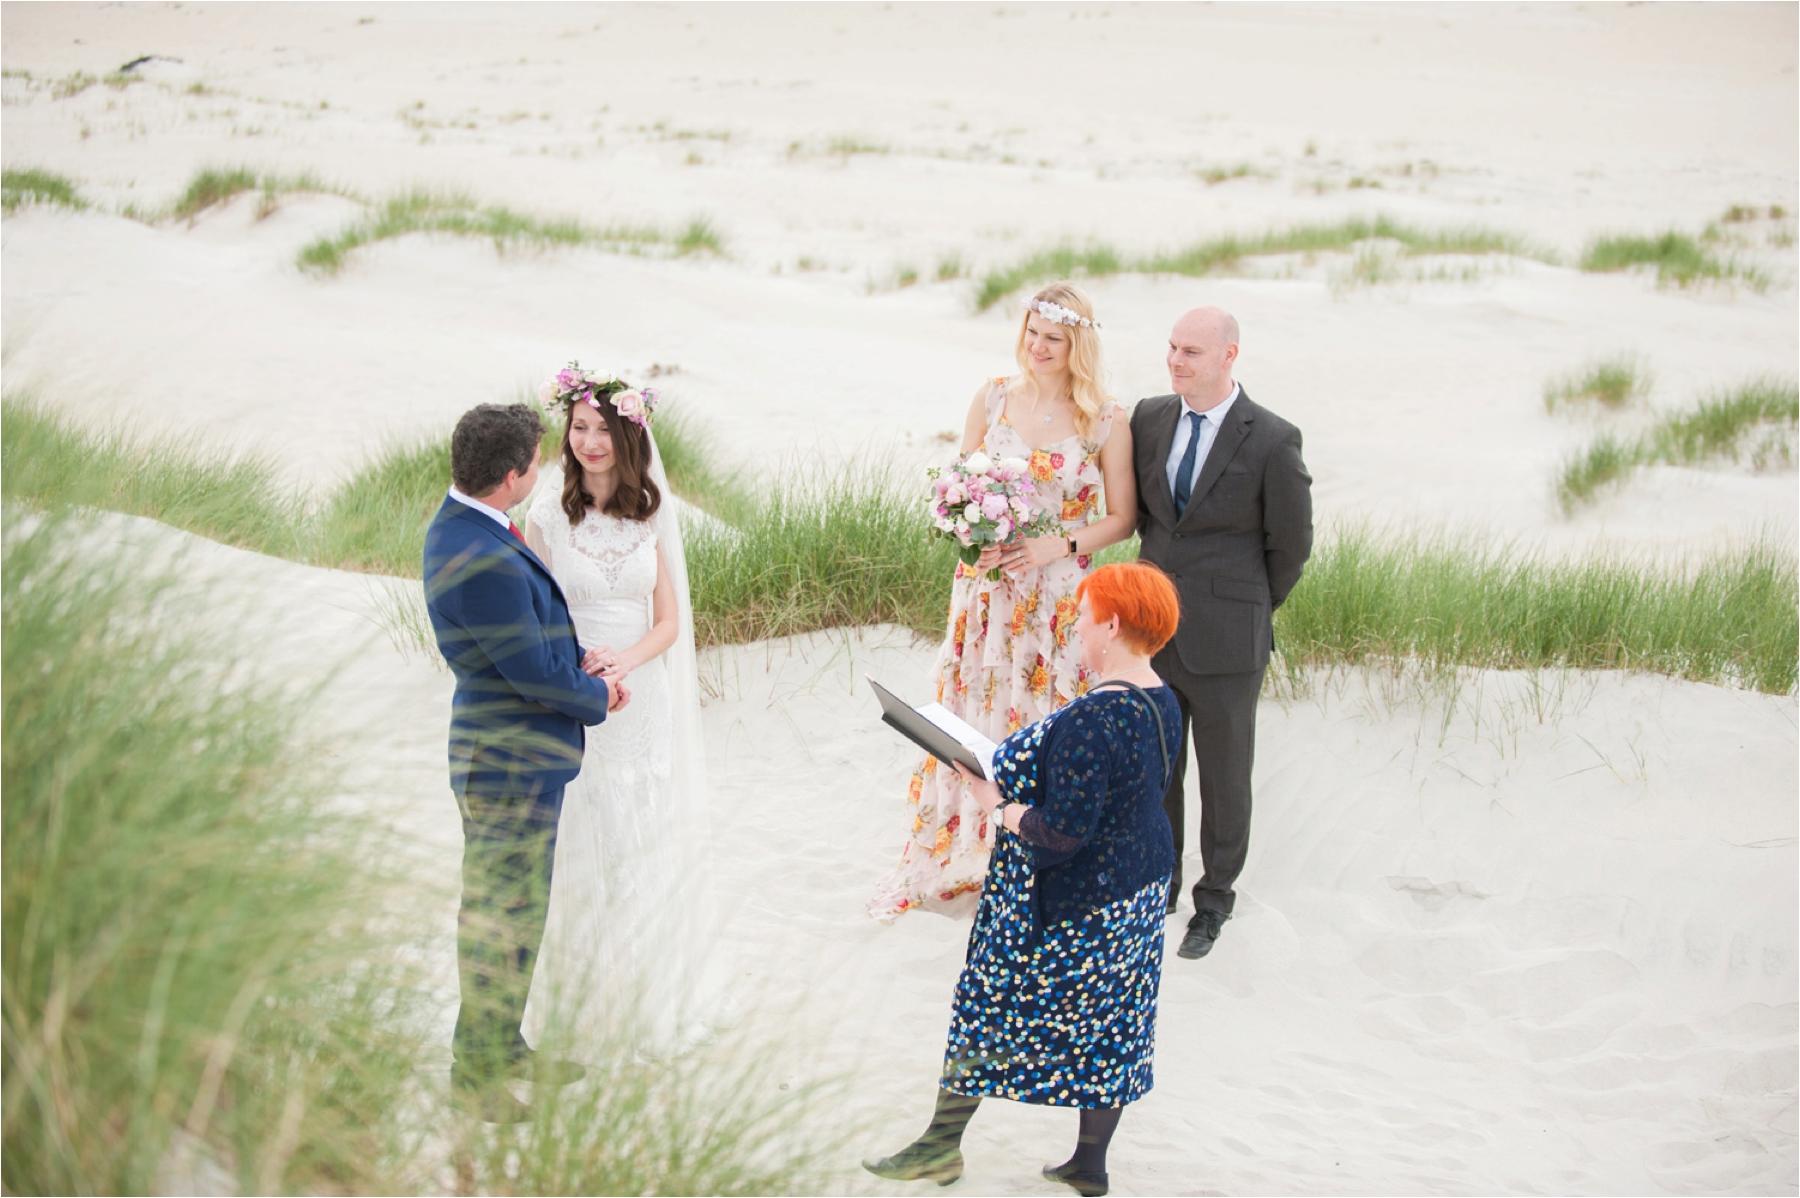 Bride and groom Ilona and Emil exchange vows in front of two friends during their elopement on Luskentyre Beach with celebrant Helen Mayer.